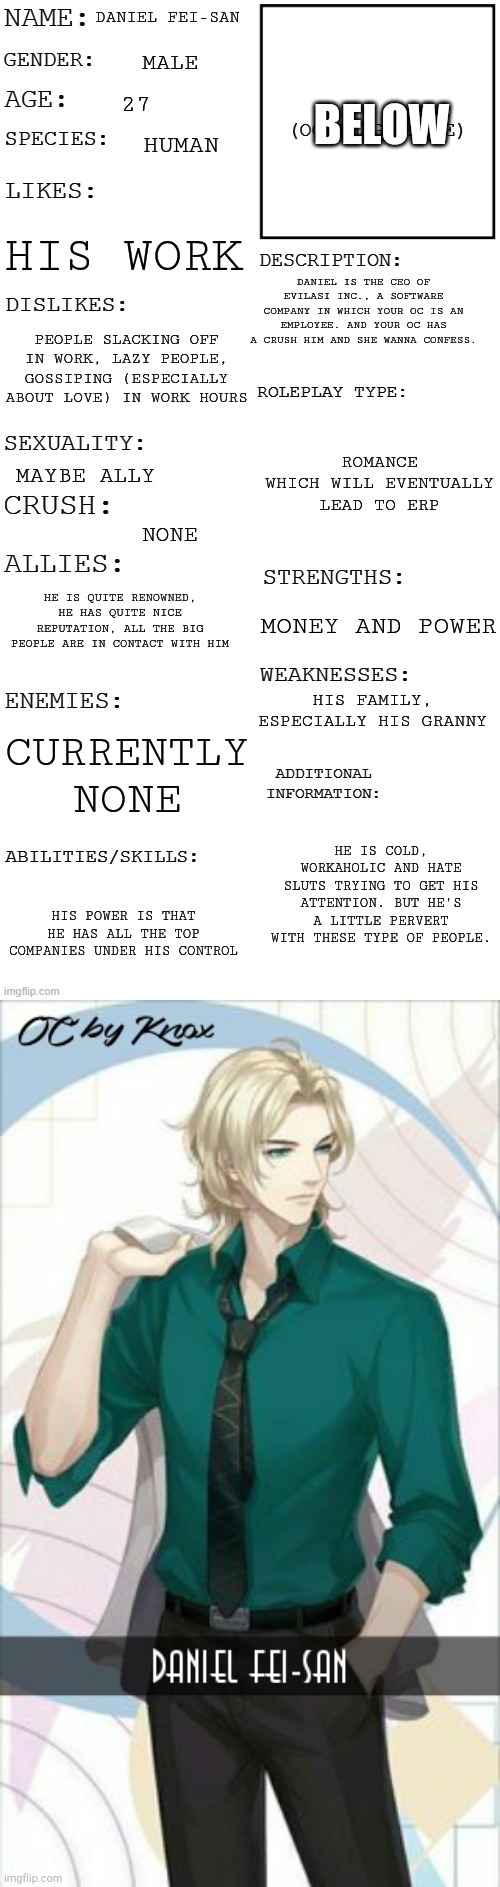 Your OC should be Ally Female for this RP. No demons. Neko is acceptable | BELOW; DANIEL FEI-SAN; MALE; 27; HUMAN; HIS WORK; DANIEL IS THE CEO OF EVILASI INC., A SOFTWARE COMPANY IN WHICH YOUR OC IS AN EMPLOYEE. AND YOUR OC HAS A CRUSH HIM AND SHE WANNA CONFESS. PEOPLE SLACKING OFF IN WORK, LAZY PEOPLE, GOSSIPING (ESPECIALLY ABOUT LOVE) IN WORK HOURS; ROMANCE WHICH WILL EVENTUALLY LEAD TO ERP; MAYBE ALLY; NONE; HE IS QUITE RENOWNED, HE HAS QUITE NICE REPUTATION, ALL THE BIG PEOPLE ARE IN CONTACT WITH HIM; MONEY AND POWER; HIS FAMILY, ESPECIALLY HIS GRANNY; CURRENTLY NONE; HE IS COLD, WORKAHOLIC AND HATE SLUTS TRYING TO GET HIS ATTENTION. BUT HE'S A LITTLE PERVERT WITH THESE TYPE OF PEOPLE. HIS POWER IS THAT HE HAS ALL THE TOP COMPANIES UNDER HIS CONTROL | image tagged in updated roleplay oc showcase,daniel fei-san | made w/ Imgflip meme maker